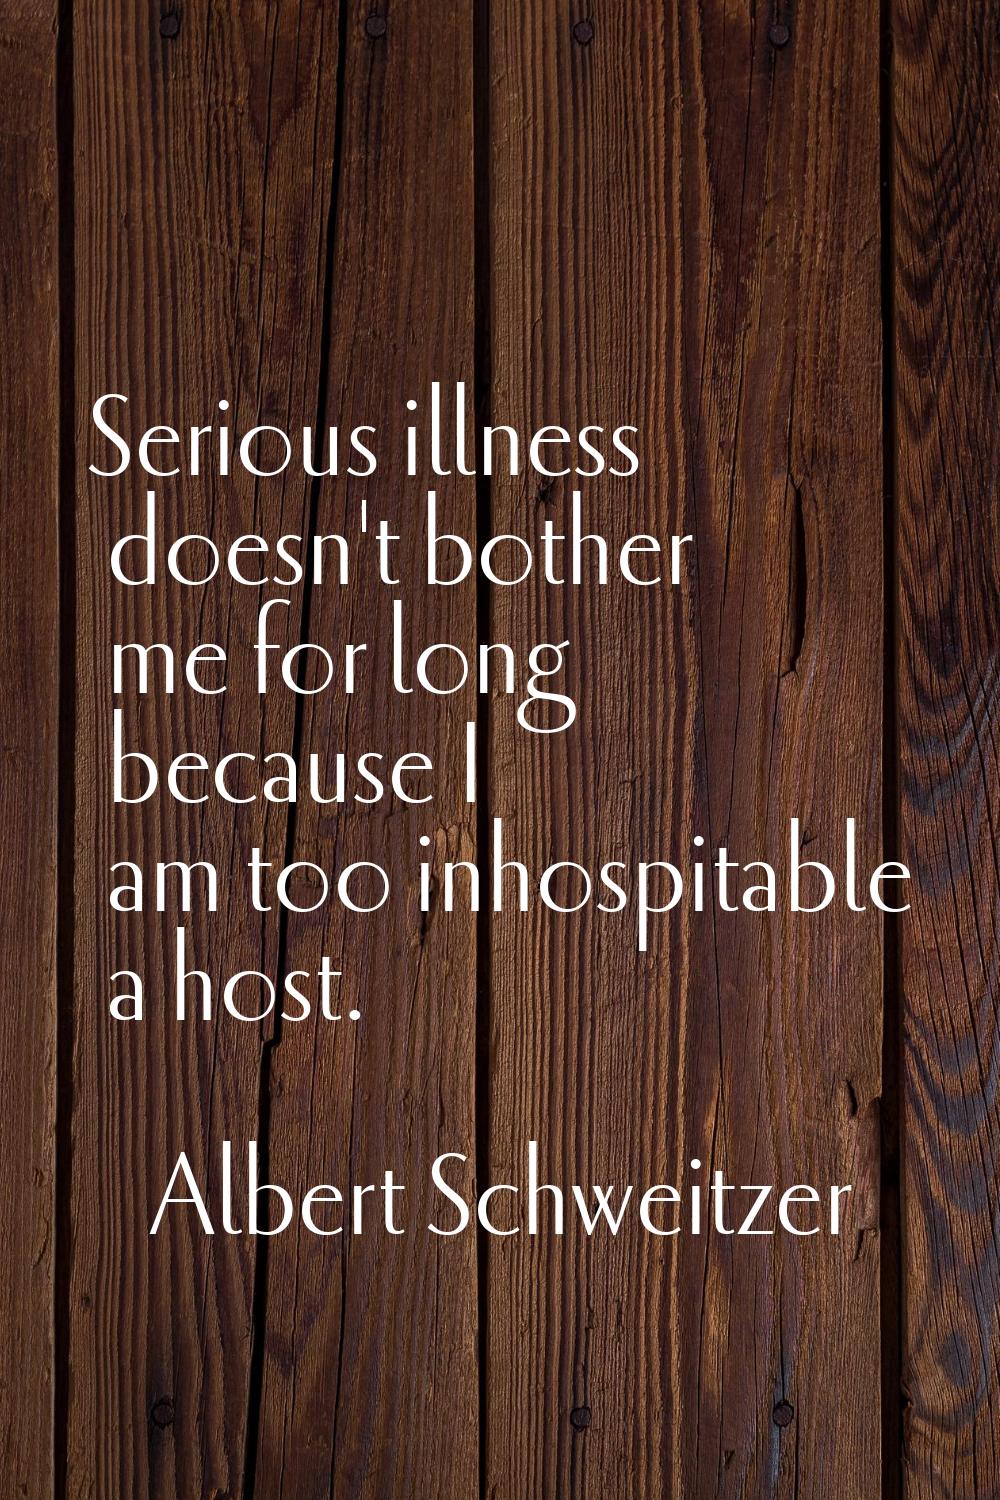 Serious illness doesn't bother me for long because I am too inhospitable a host.